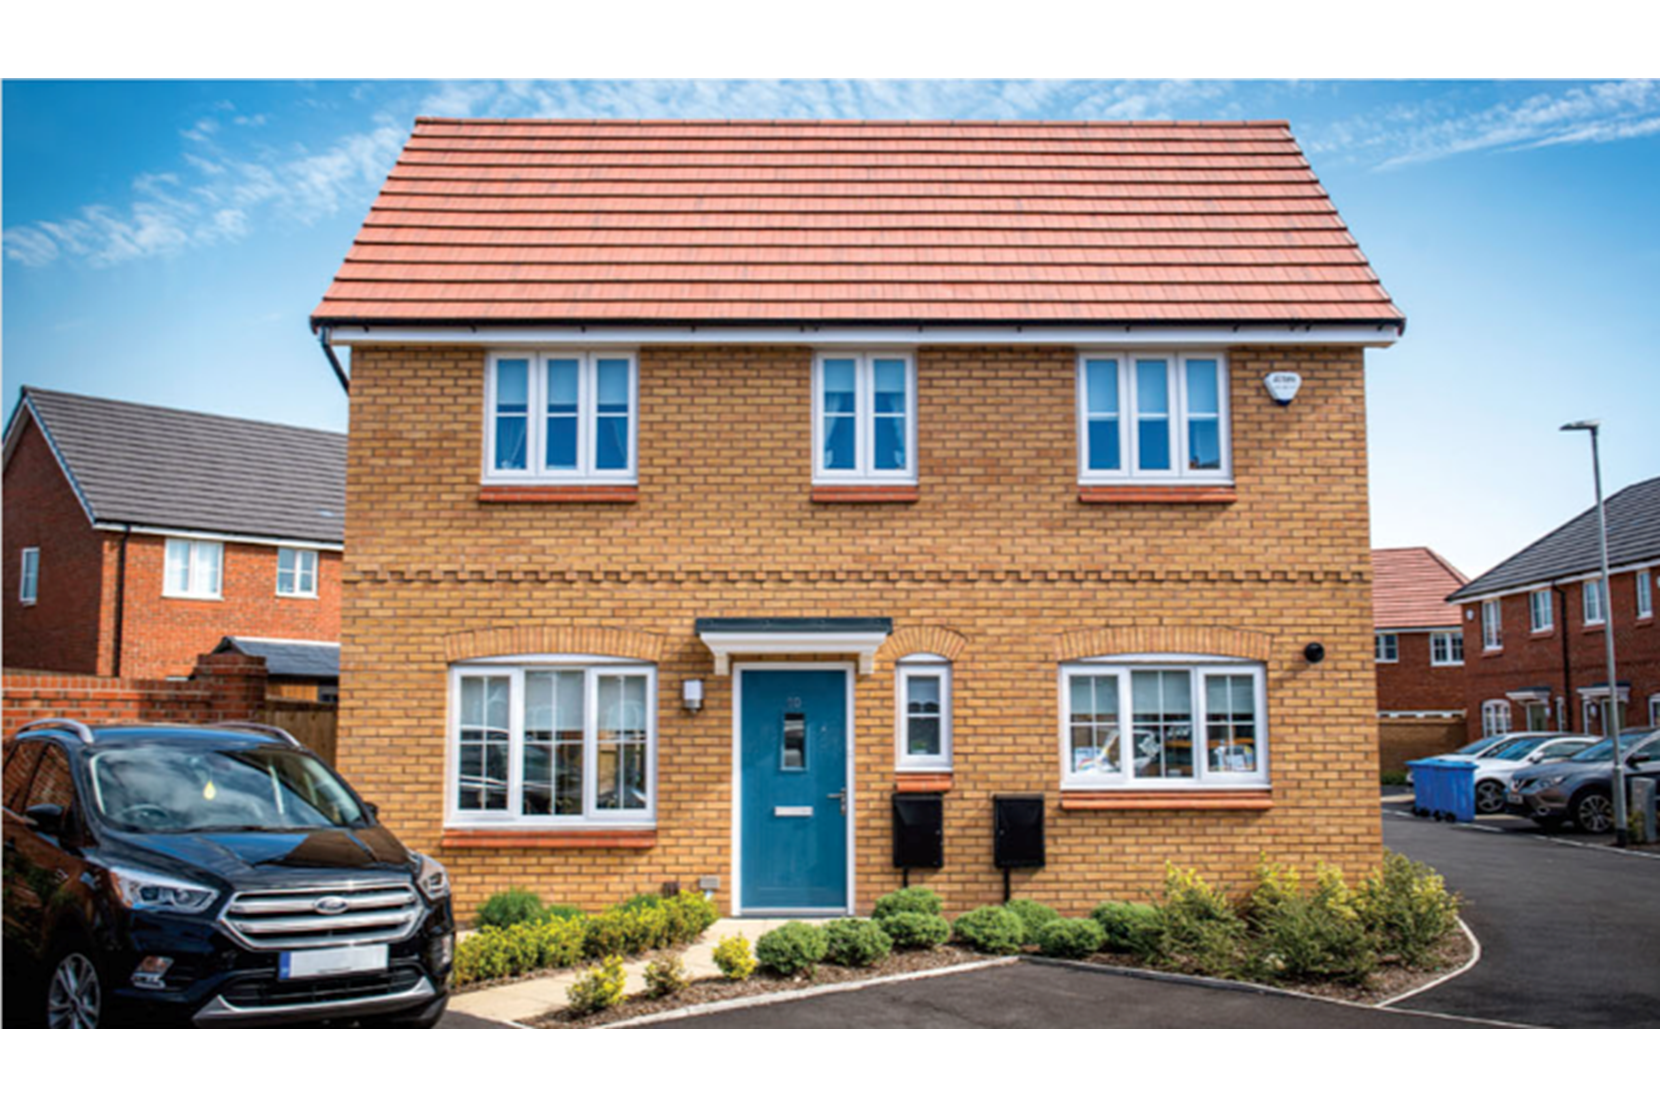 Houses to Rent by Simple Life in Pullman Green, Hexthorpe, DN4, development panoramic